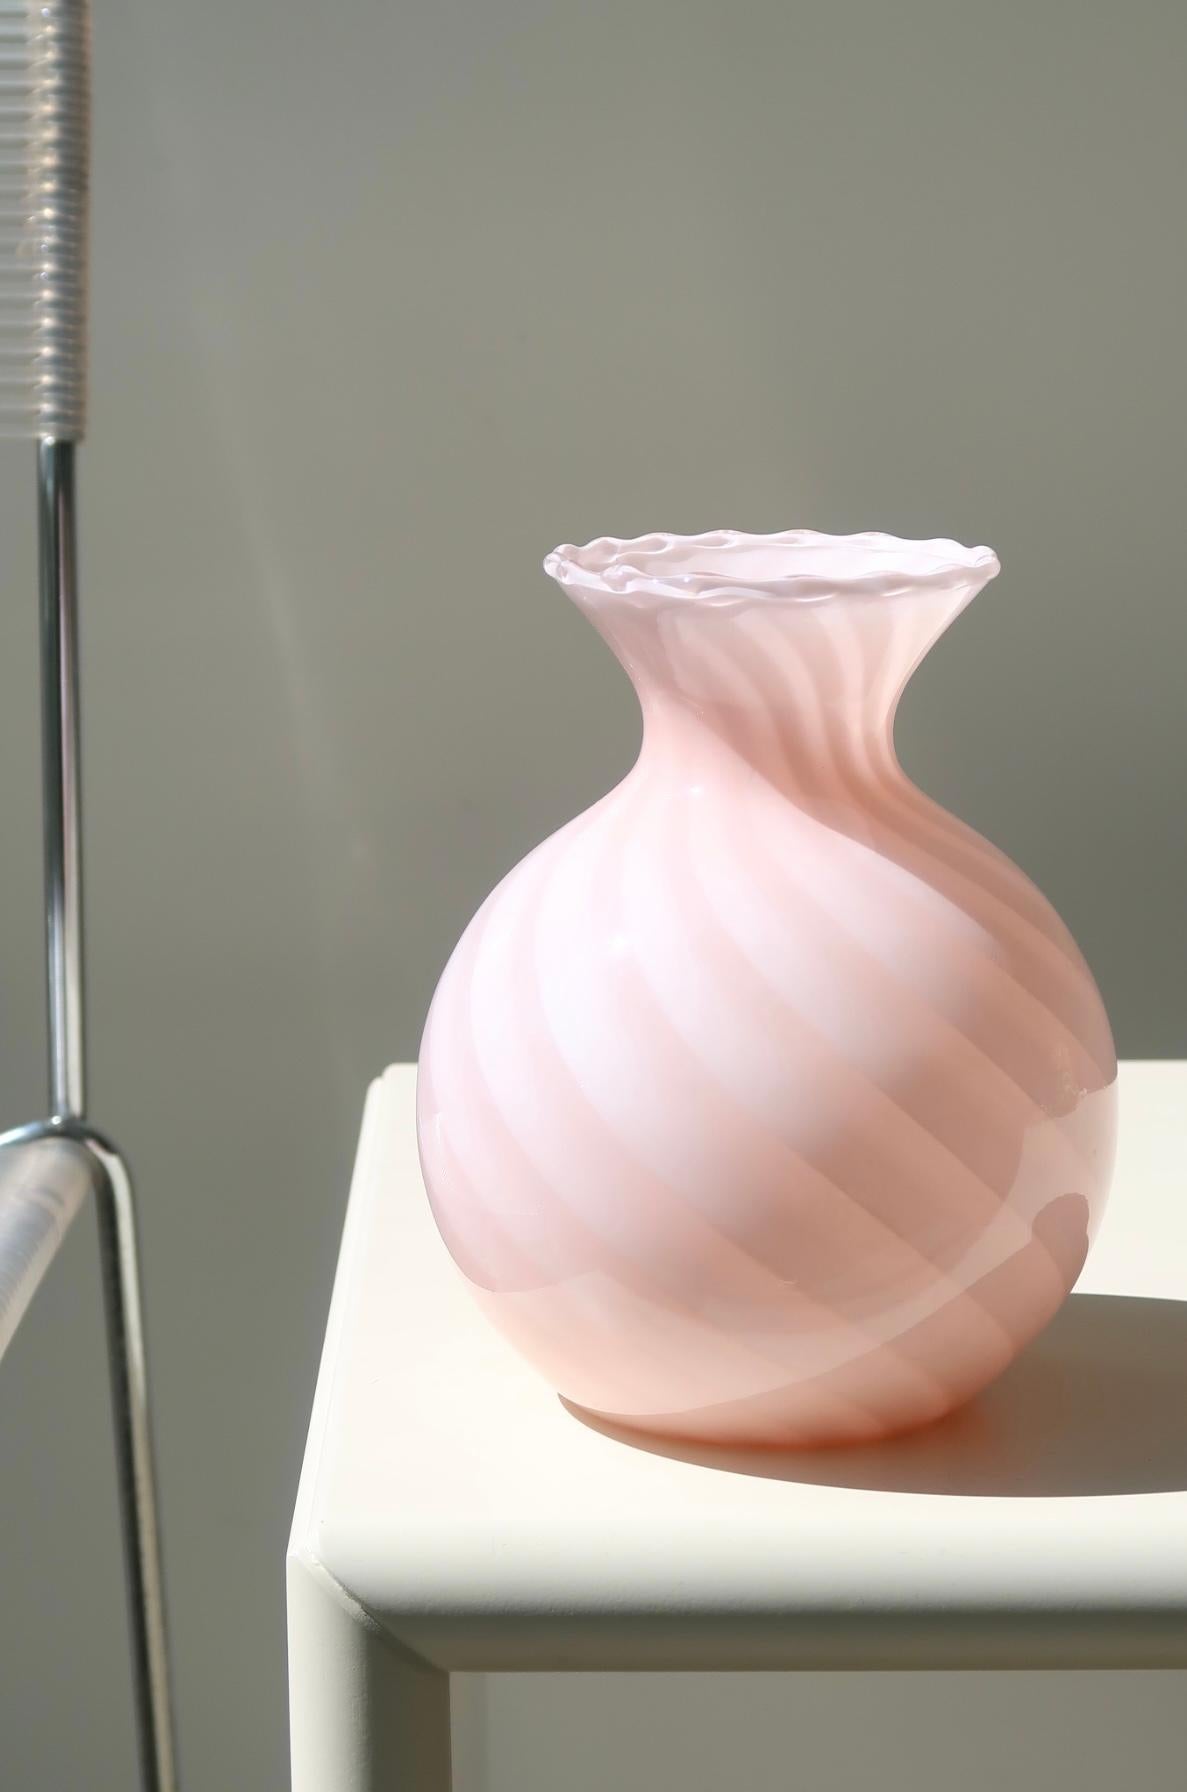 Beautiful vintage Murano glass vase in a nice pink shade. Mouth-blown glass with swirl pattern. Traces of use inside and has a burst air bubble from production. Handmade in Italy, 1970s. H: 17 cm D: 15 cm.